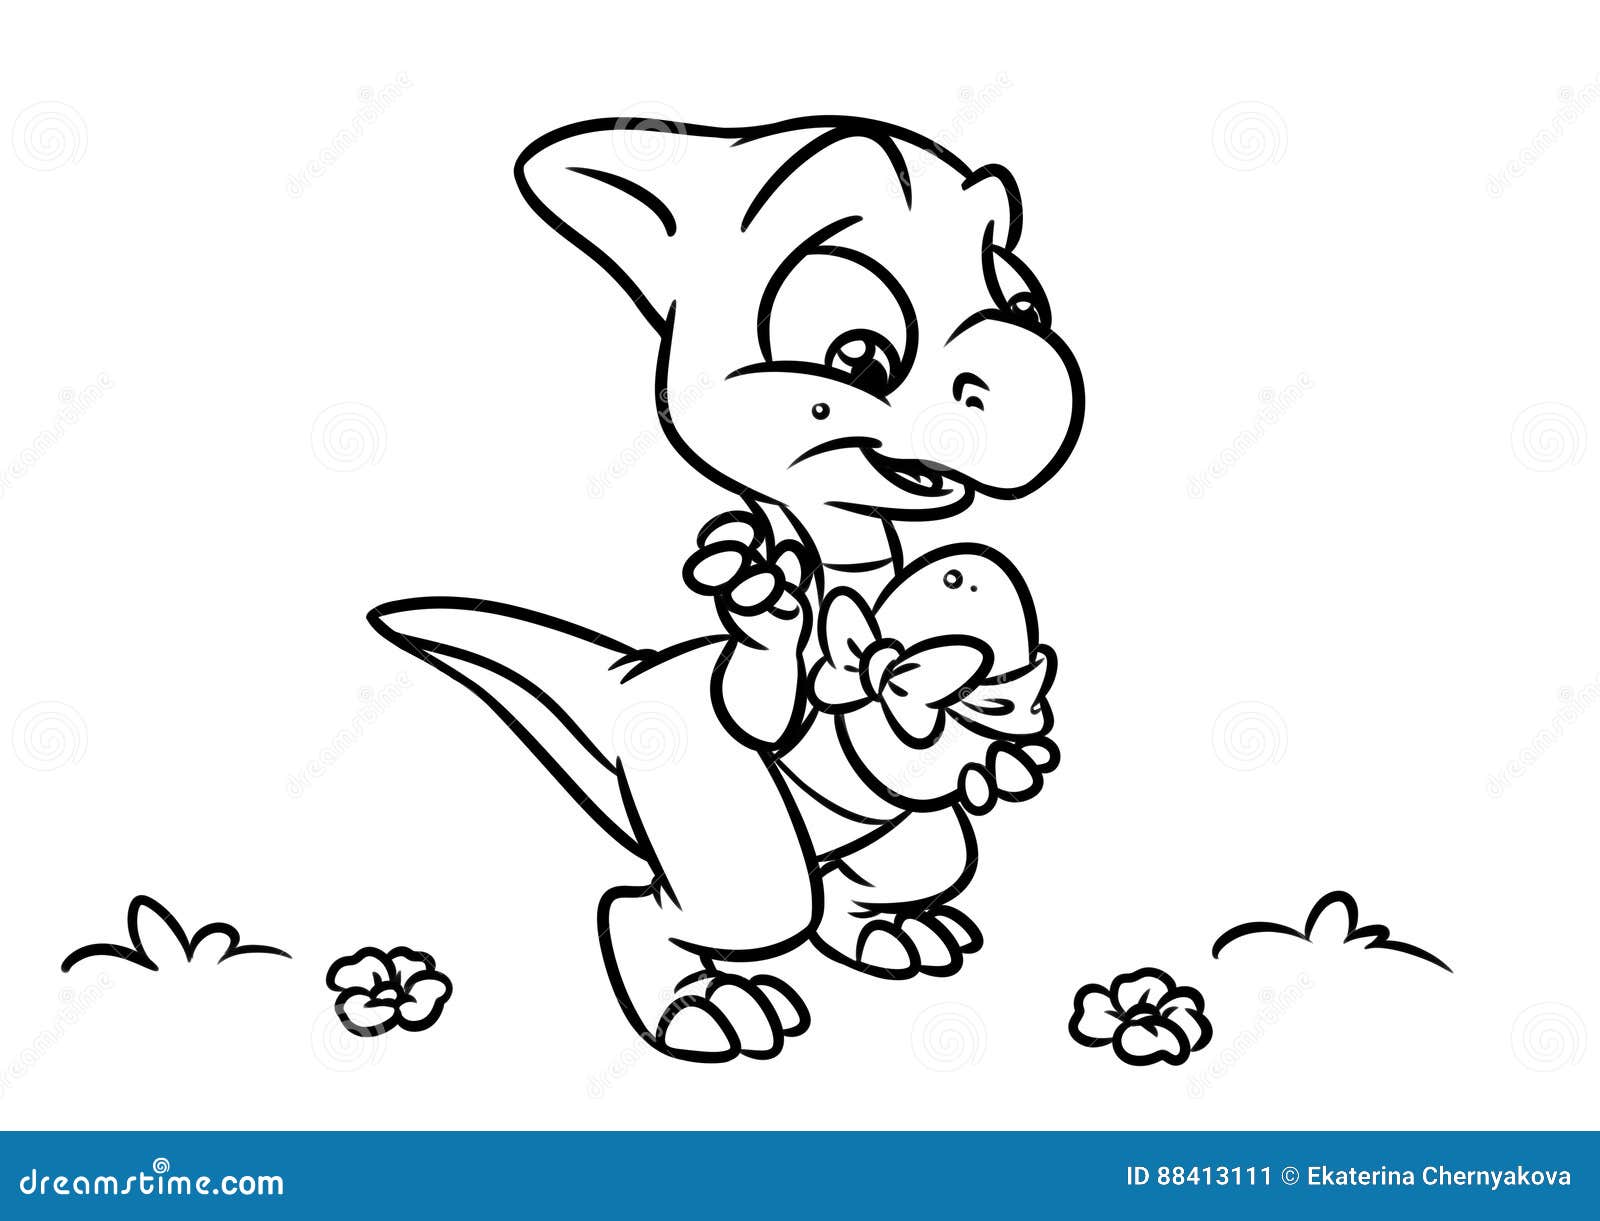 Download Dinosaur Egg Coloring Page Cartoon Illustrations Stock Illustration Illustration Of History Outline 88413111